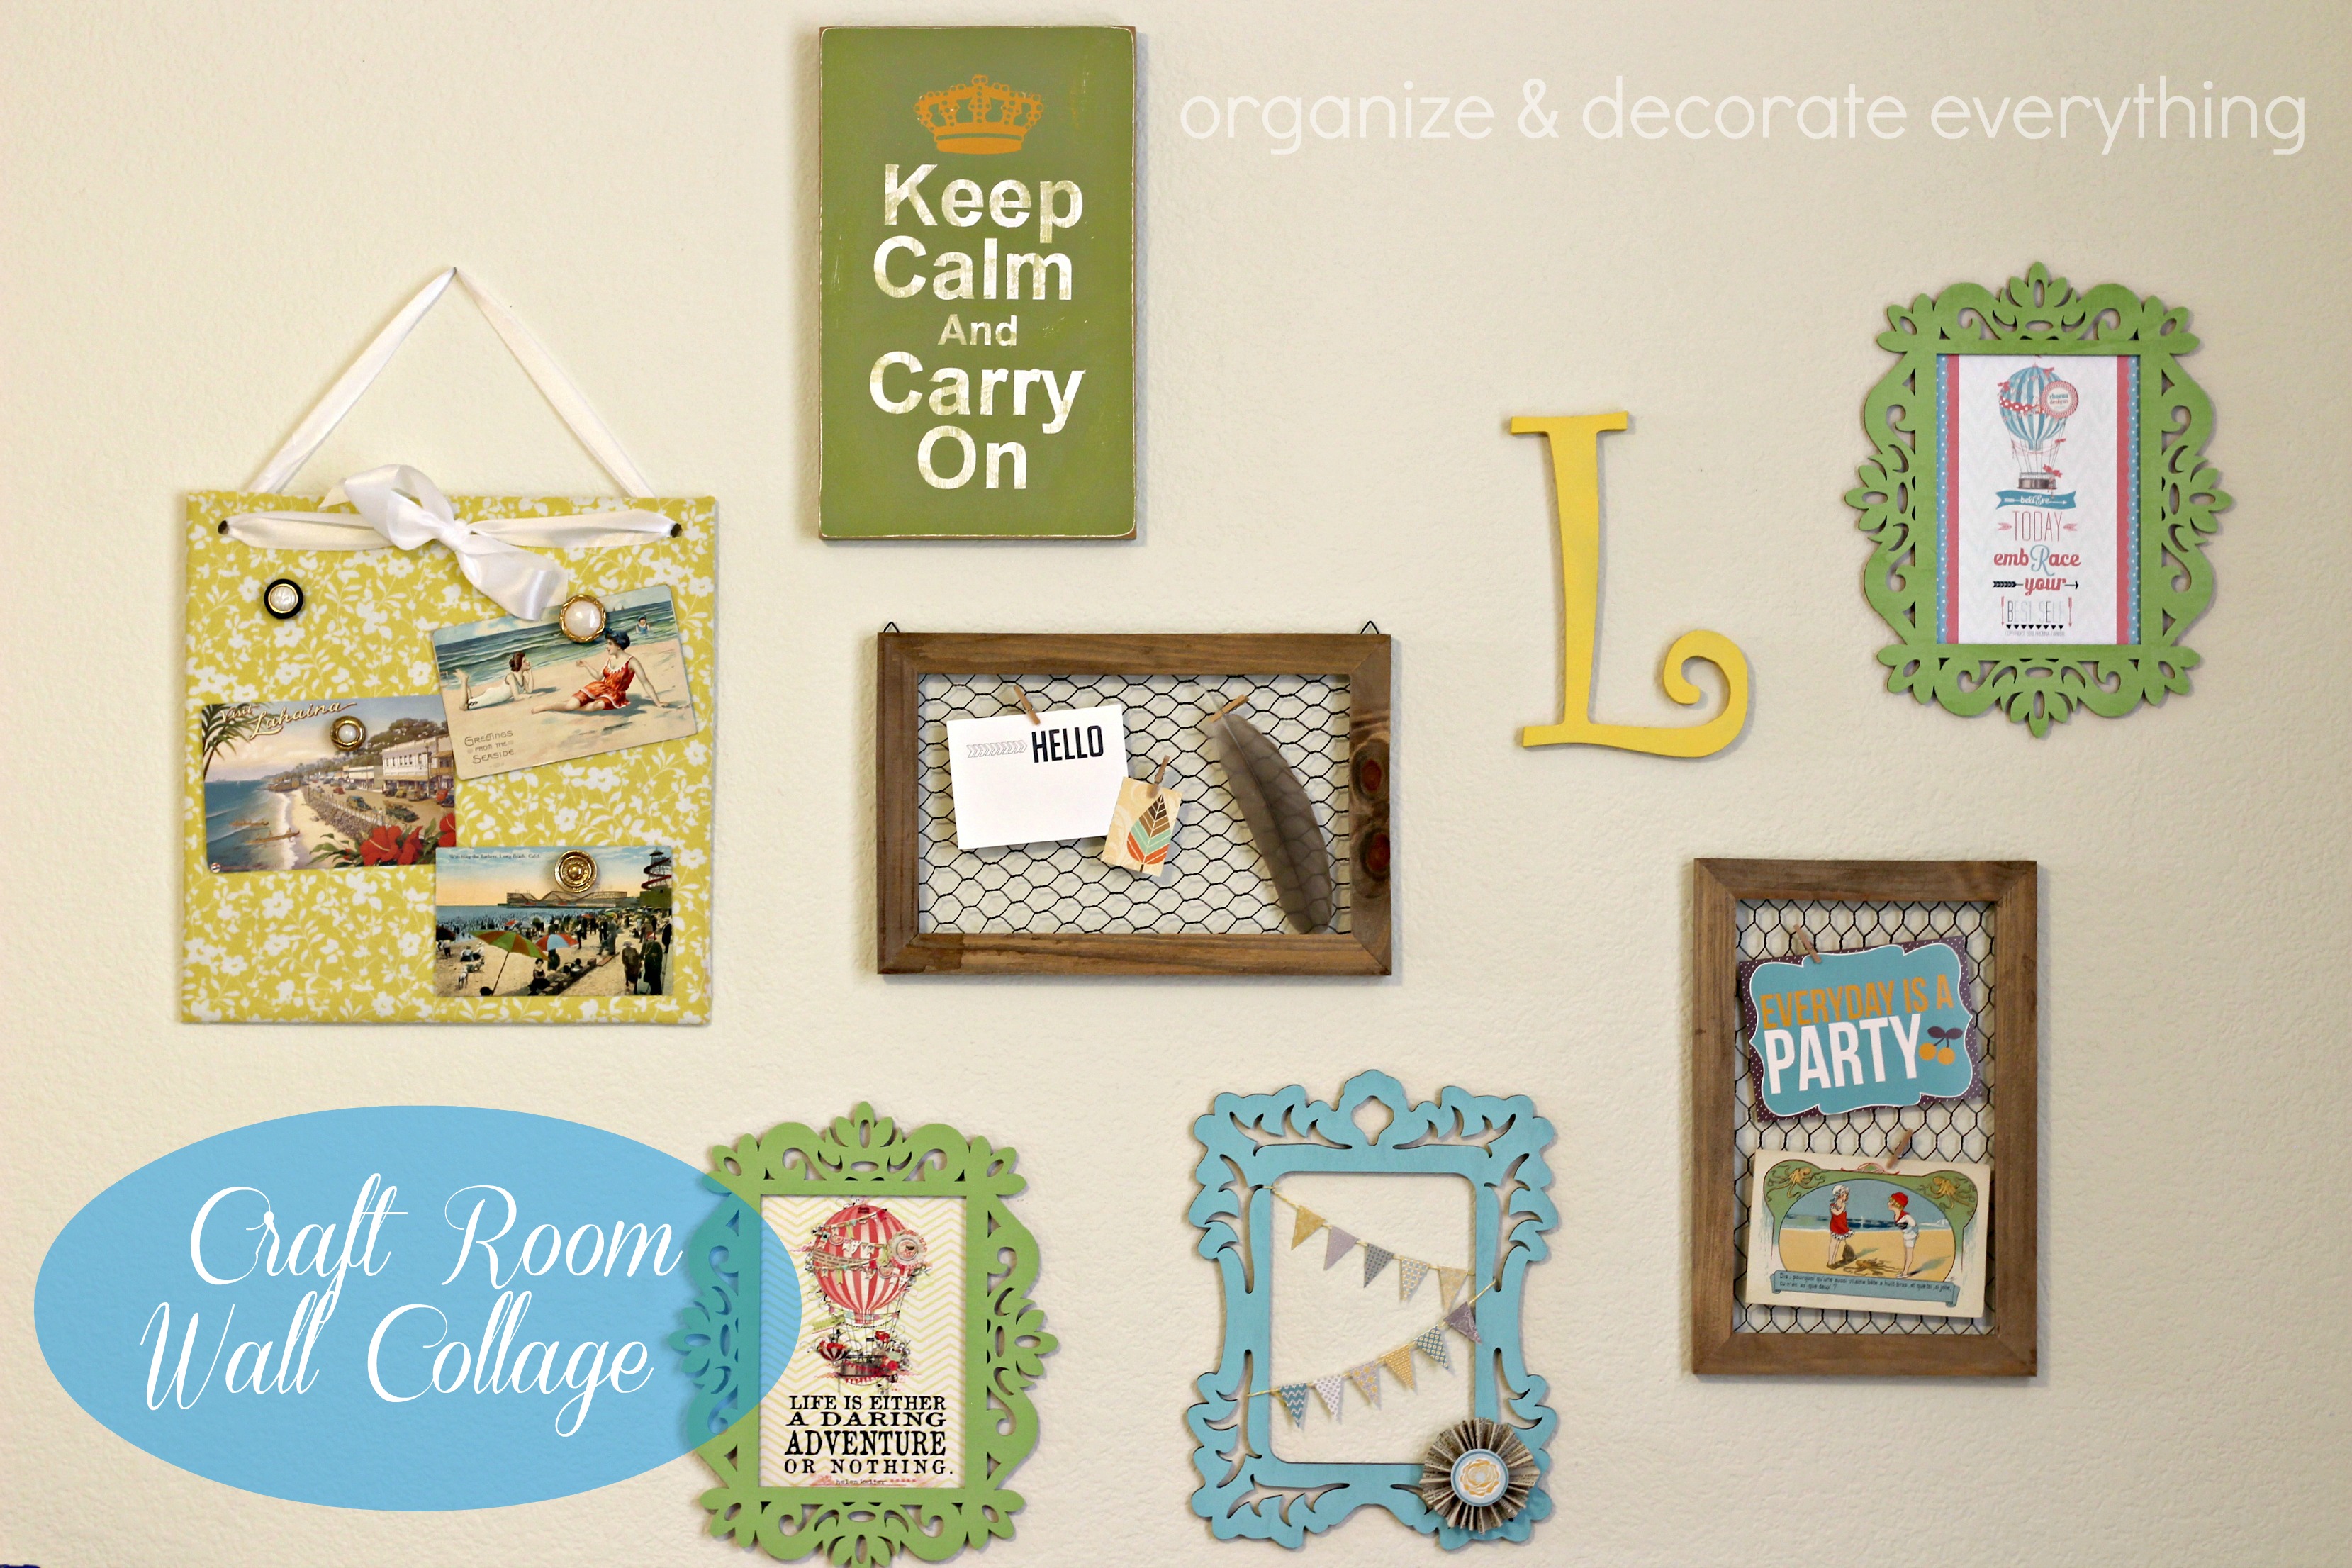 Craft Room Wall Collage - Organize and Decorate Everything